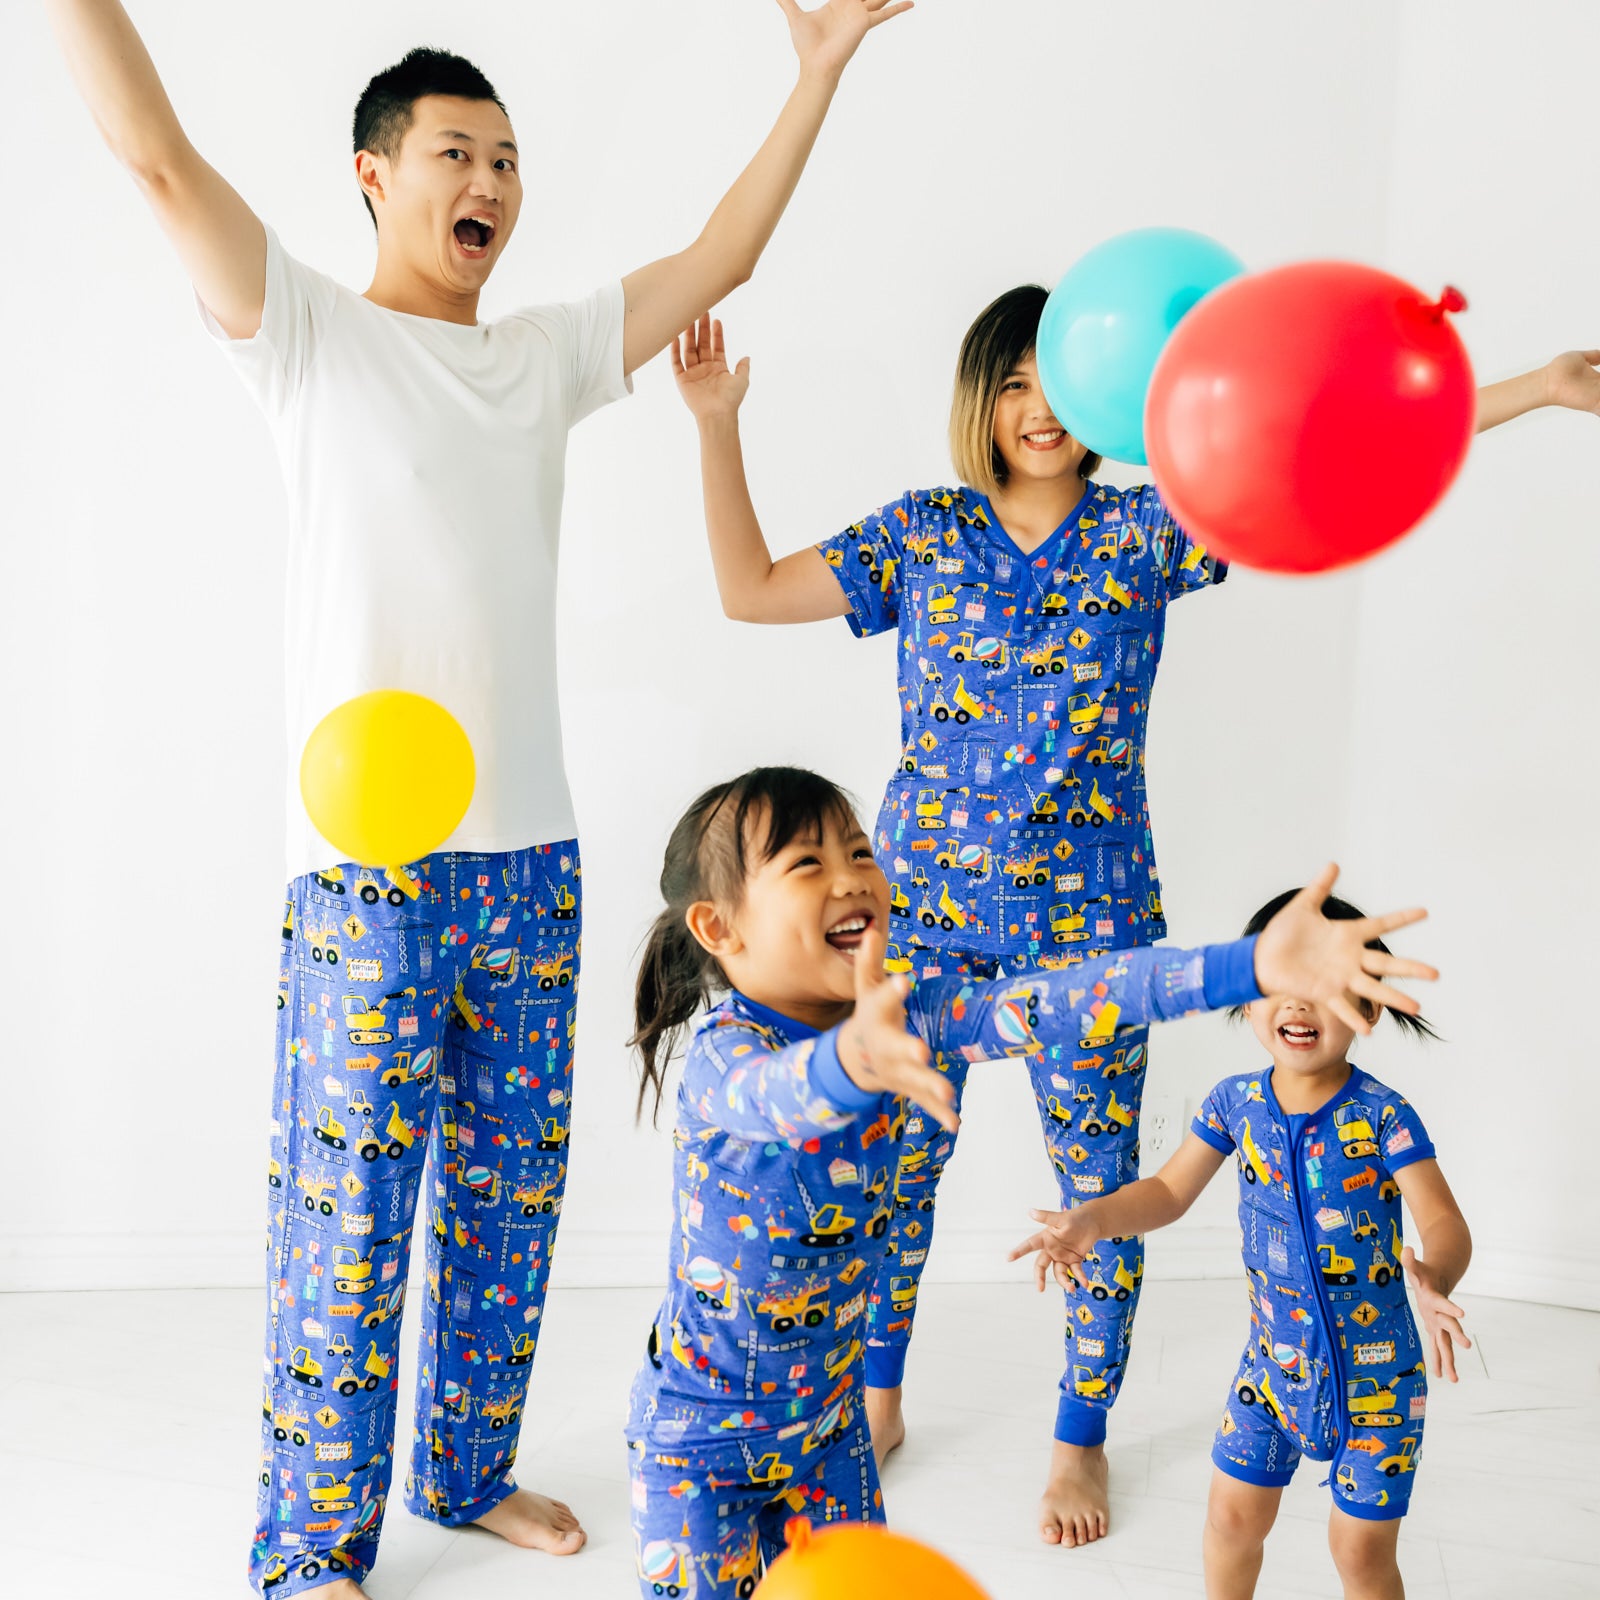 Family of four wearing matching Birthday Builder pjs. Dad is wearing men's Birthday Builders men's pj pants paired with a men's bight white top. Mom is wearing Birthday Builders women's pj top and matching women's pj pants. Kids are wearing Birthday Builders in two piece and zippy styles.